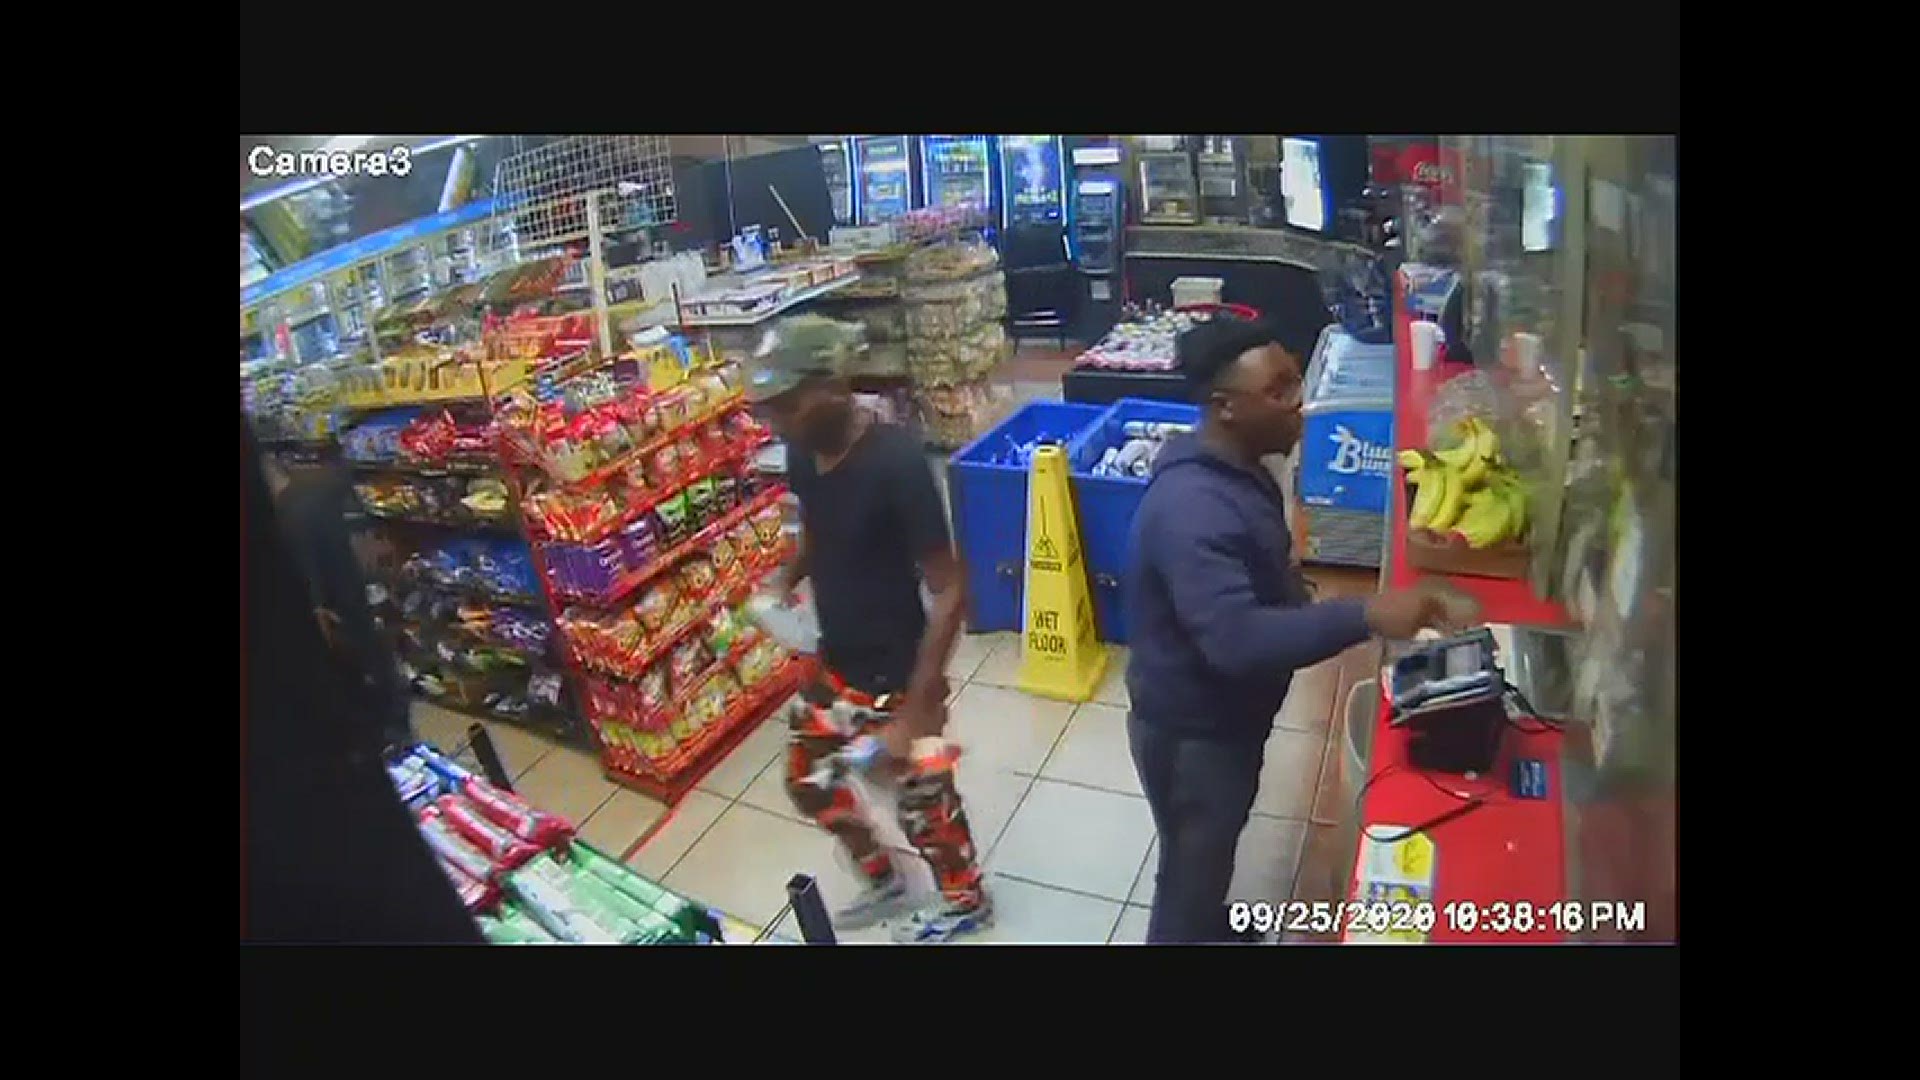 Police are searching for a person in interest in connection with a recent armed robbery. They're asking for the public's help.